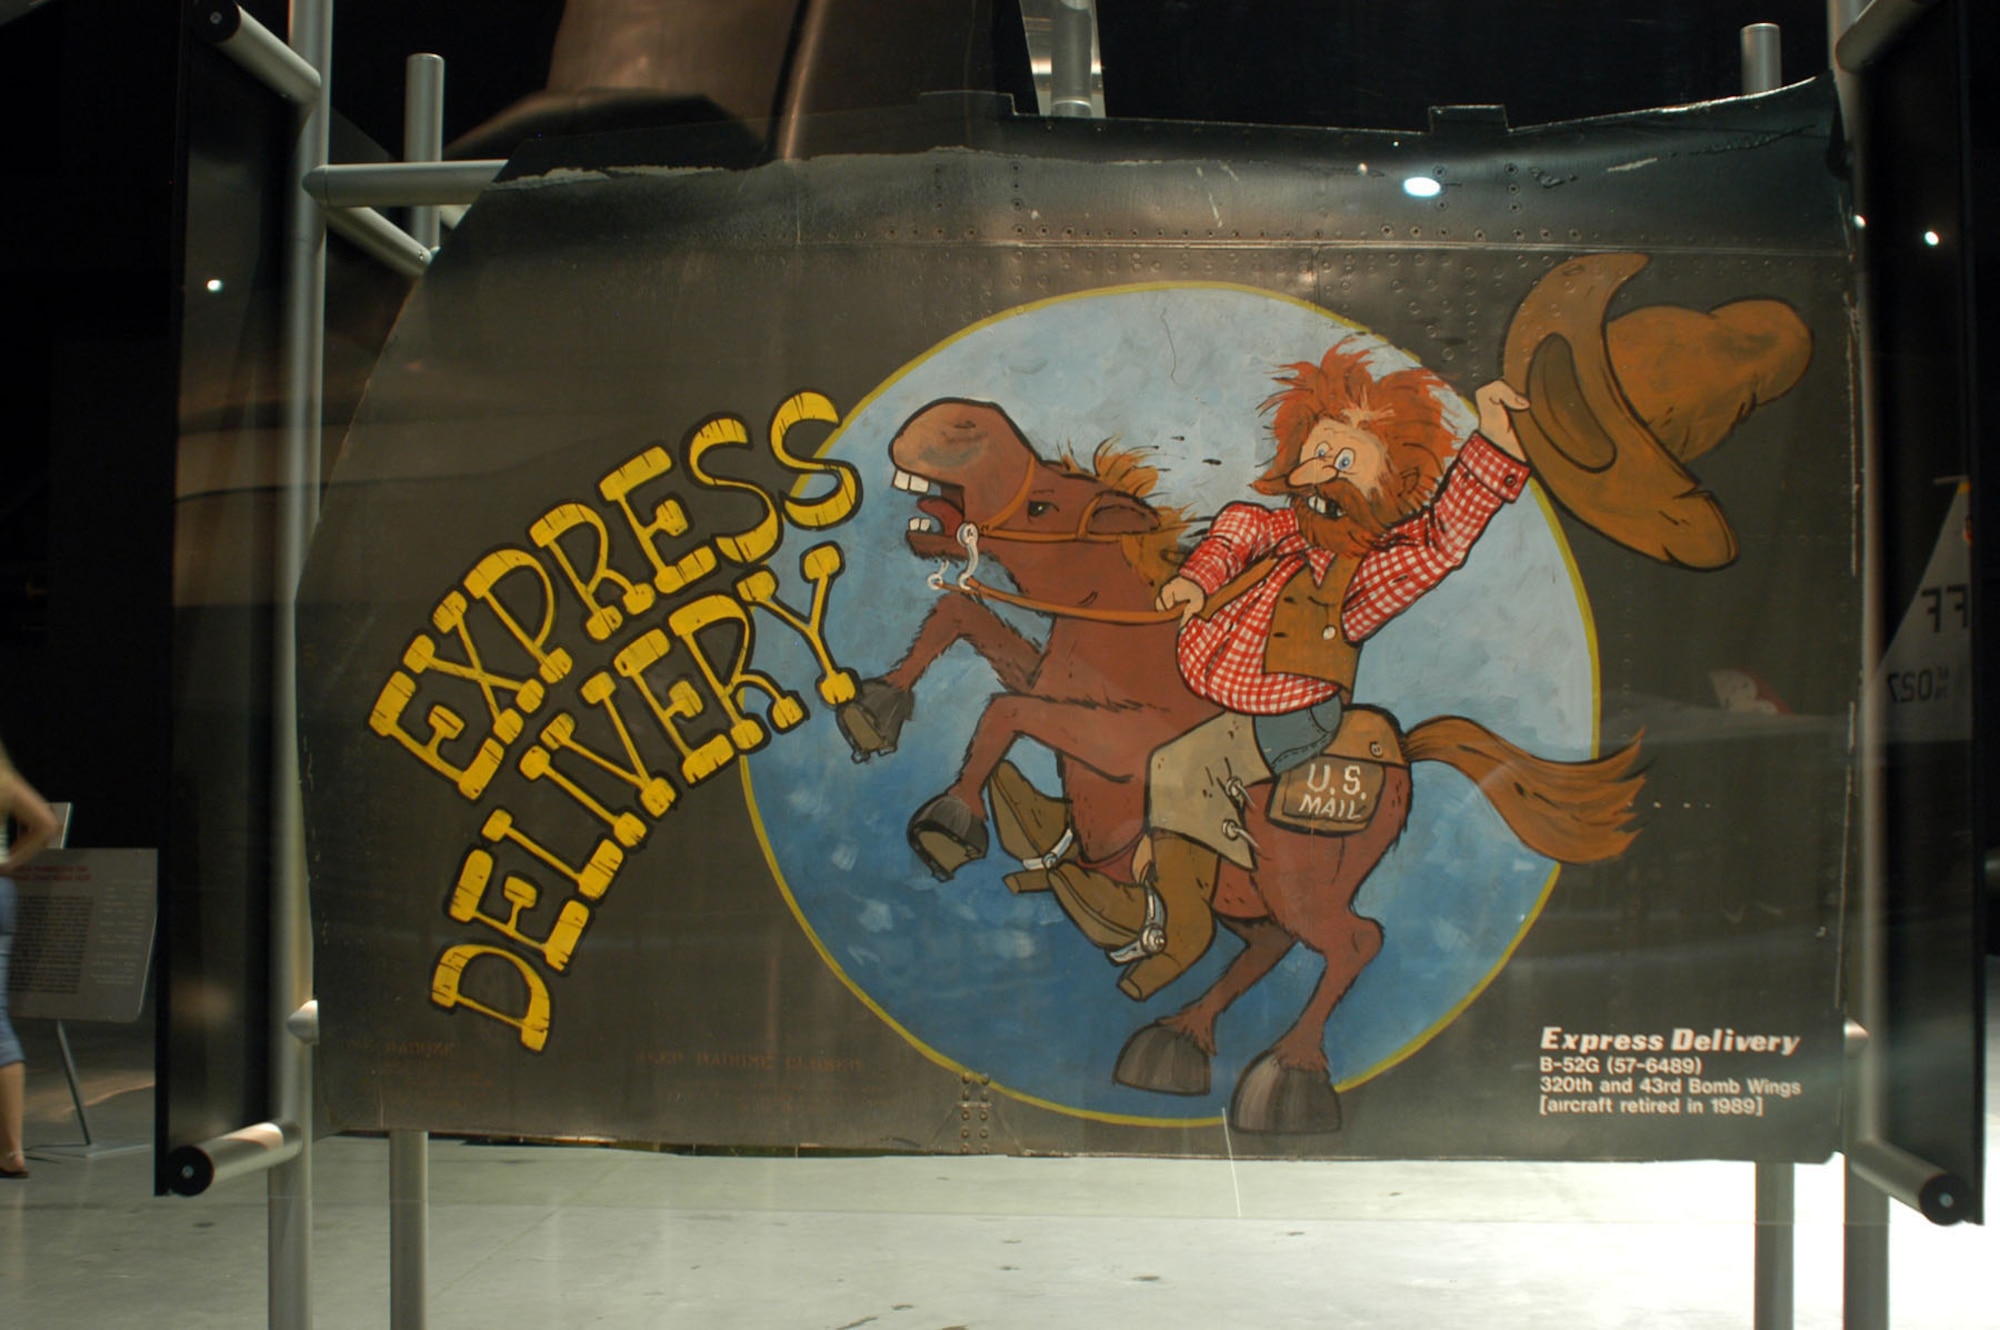 DAYTON, Ohio -- "Express Delivery" nose art from a Boeing B-52G on display in the Cold War Gallery at the National Museum of the United States Air Force. (U.S. Air Force photo)